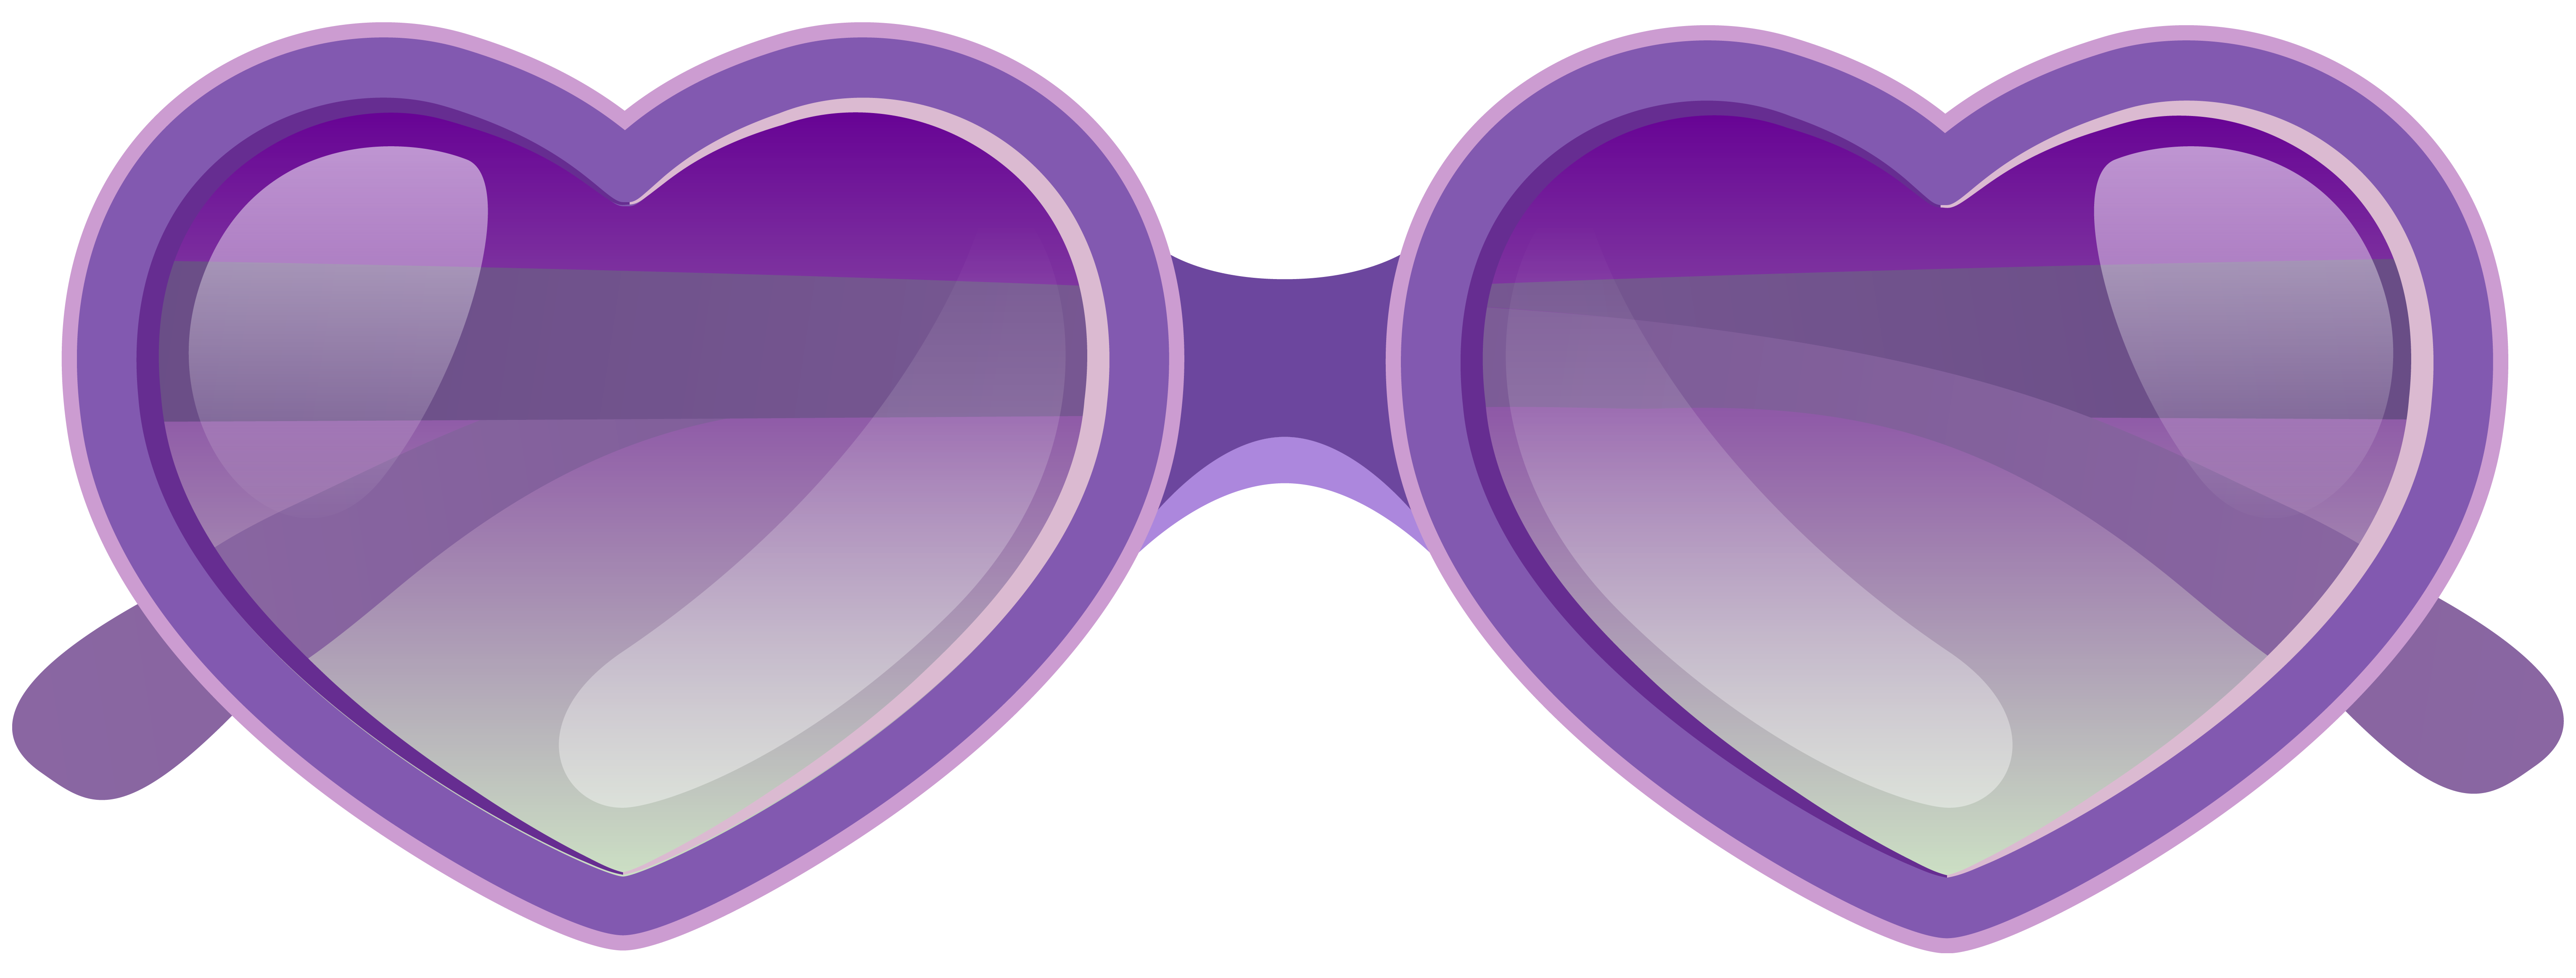 Mickey clipart sunglasses. Purple heart png image